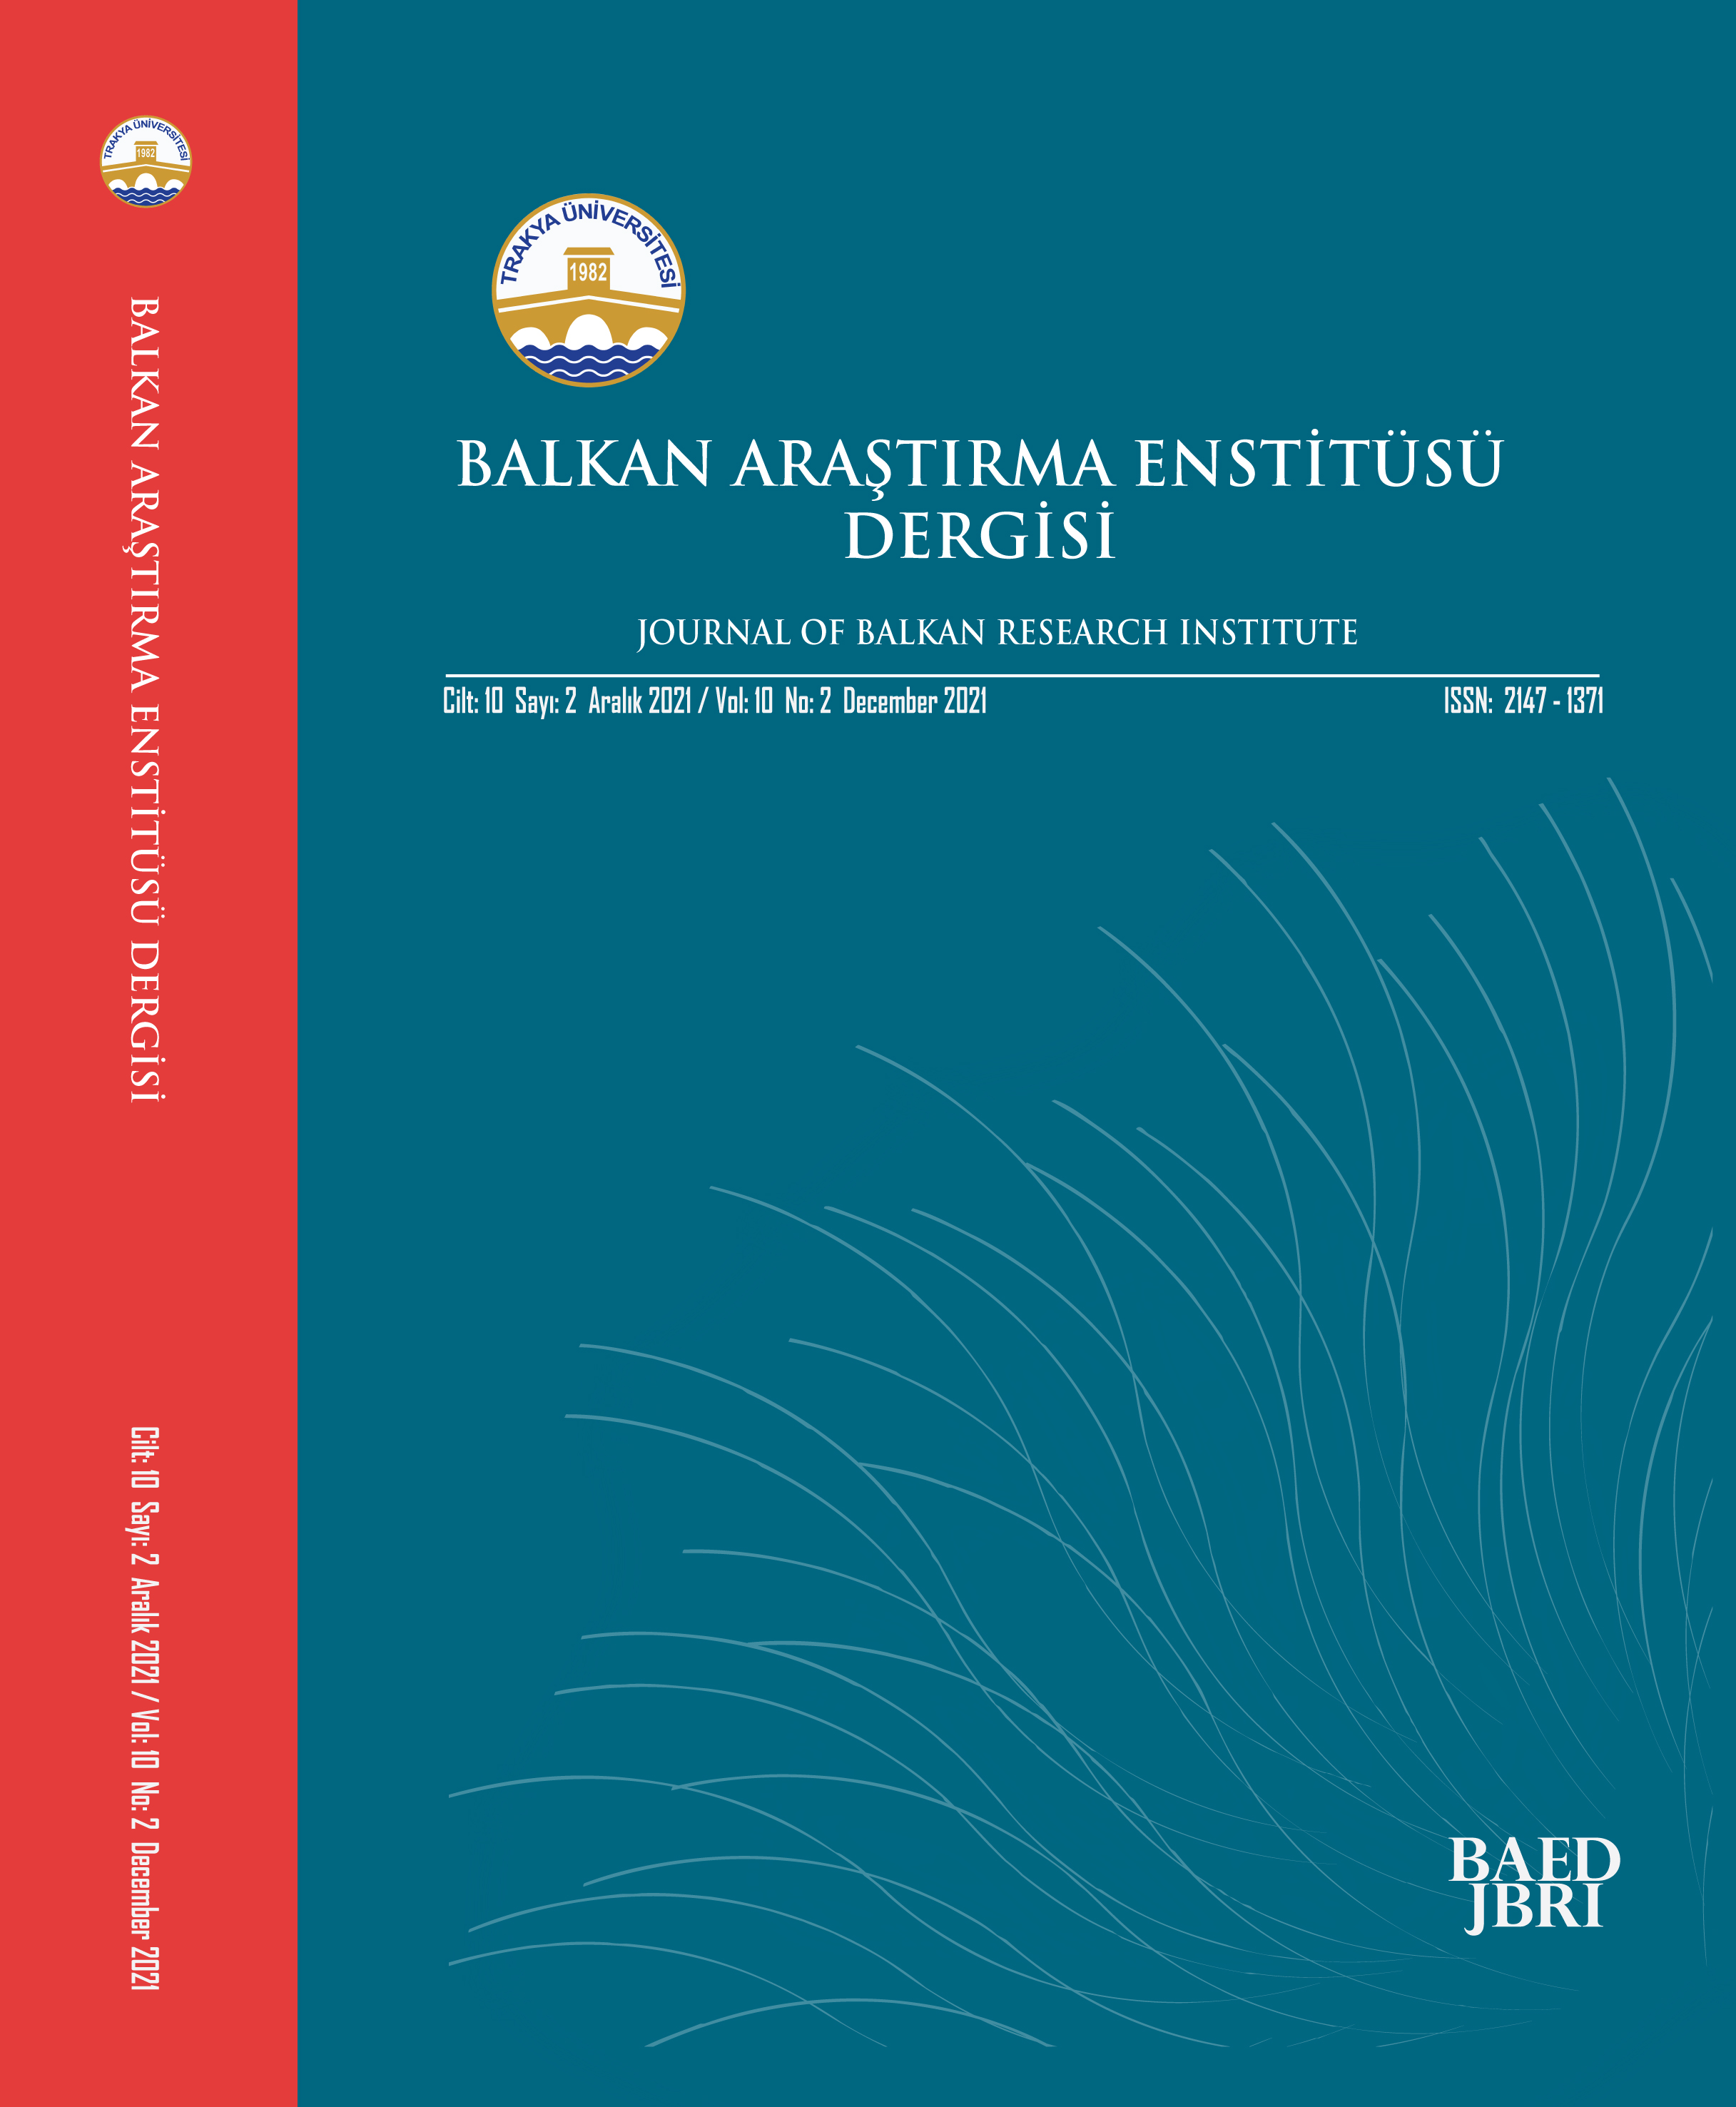 TURKEY-GREECE SUPPLEMENTARY AGREEMENT IN THE CONTEXT OF BALKAN POLICY OF ATATURK PERIOD Cover Image